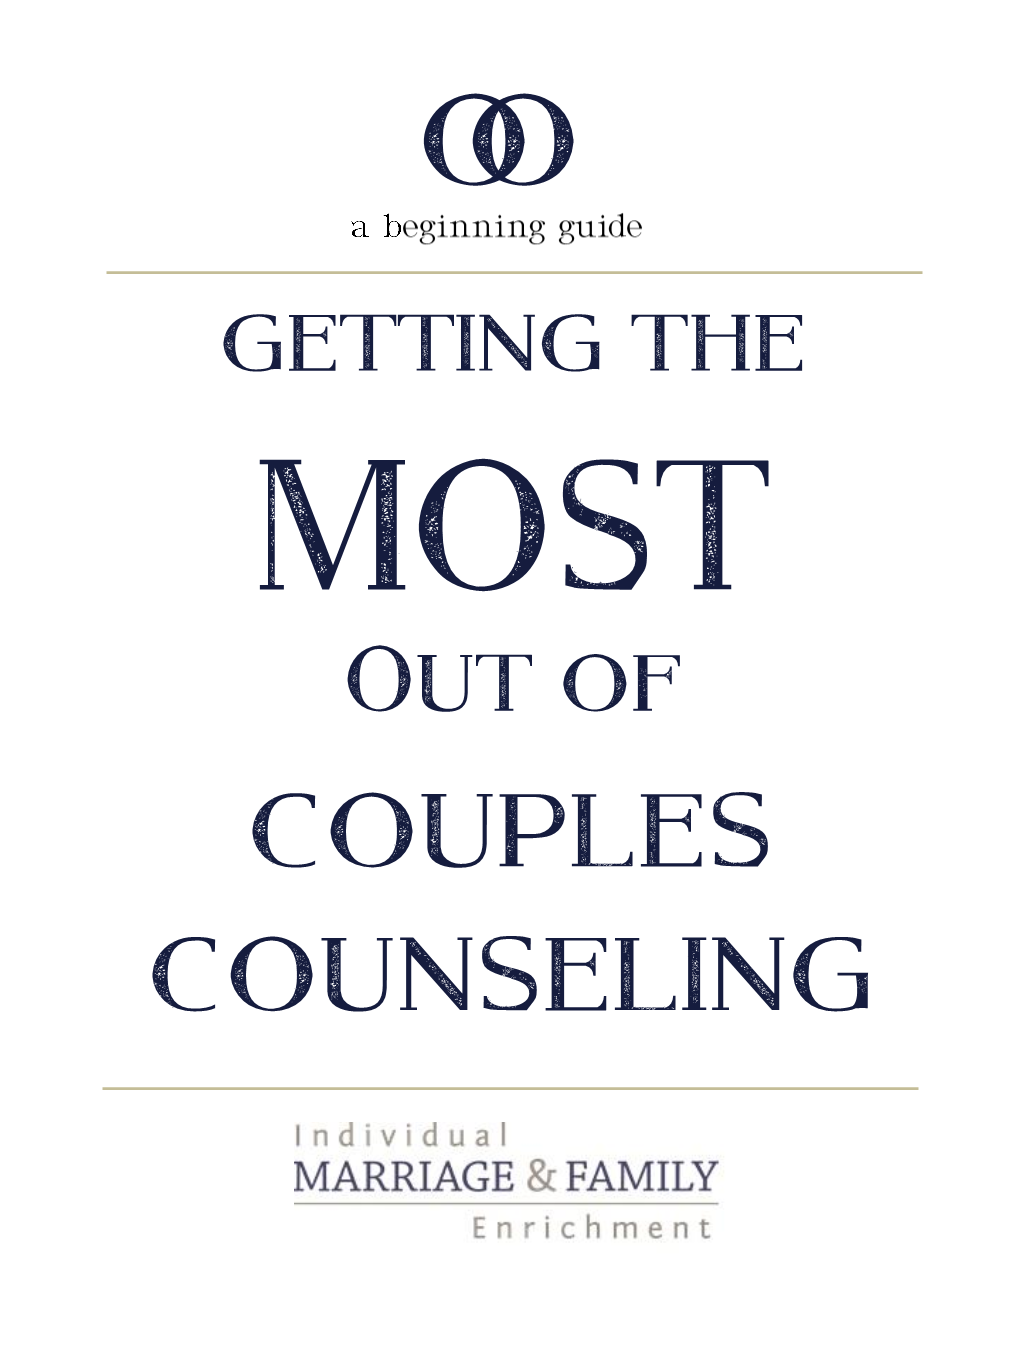 Couples-Counseling-Booklet.Pdf